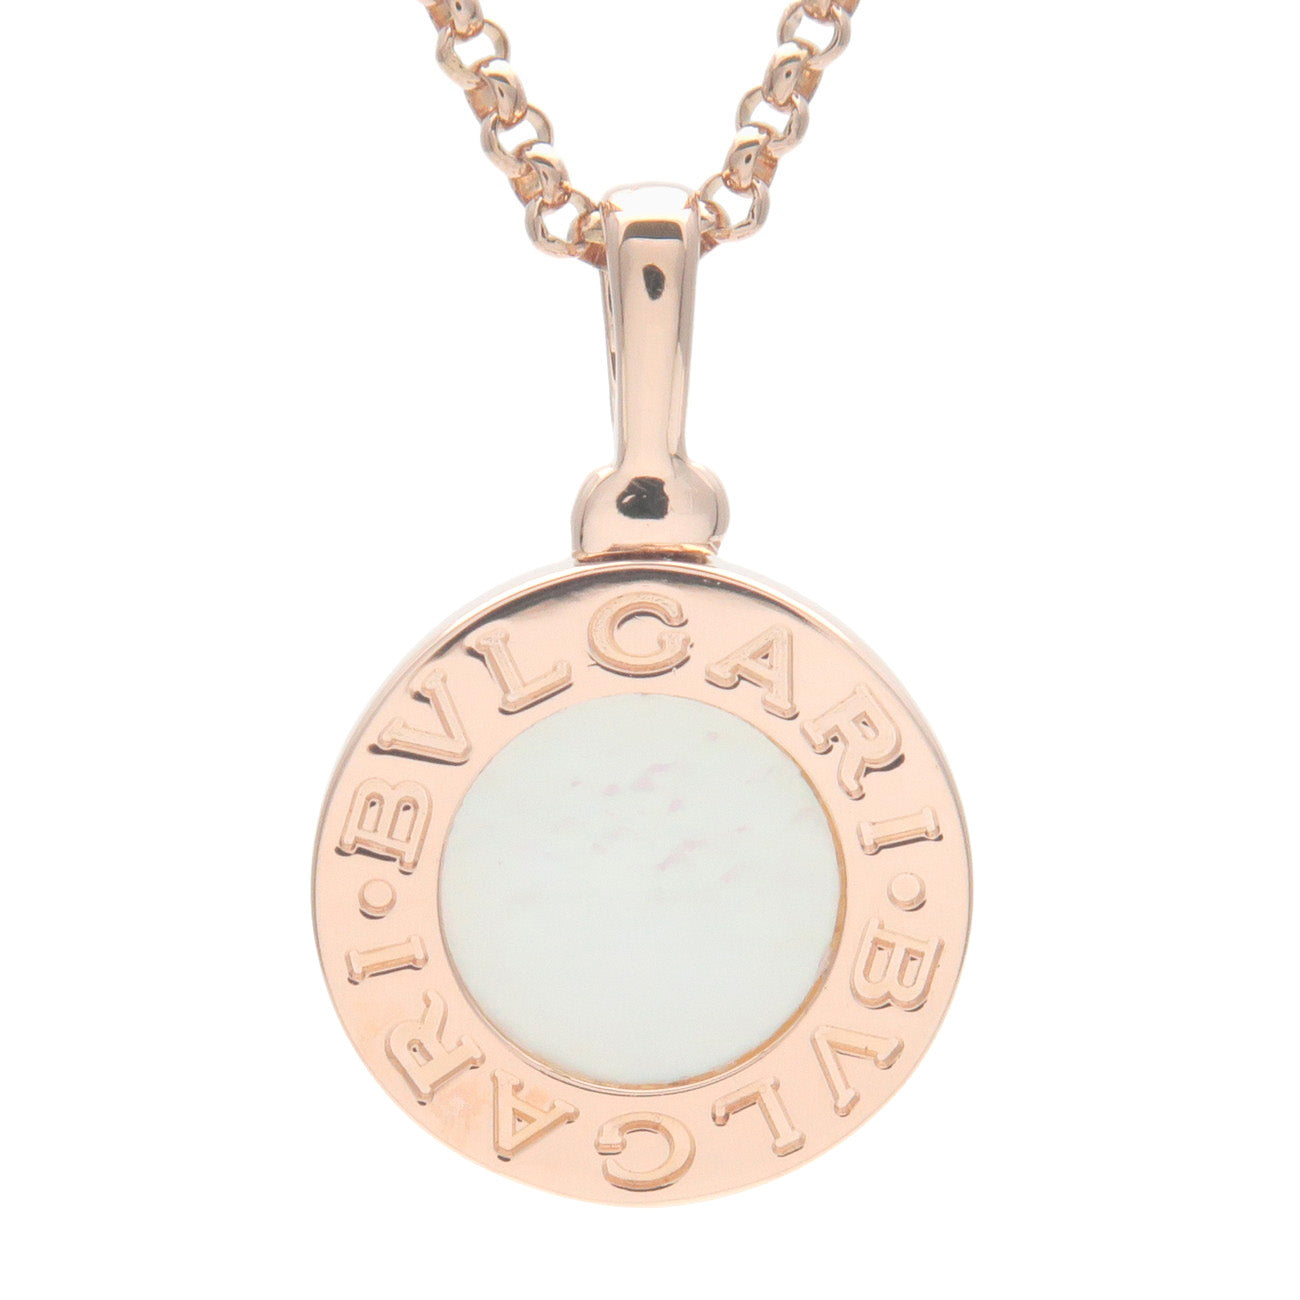 BVLGARI-Mother-of-Pearl-Shell-Necklace-K18PG-750PG-Rose-Gold